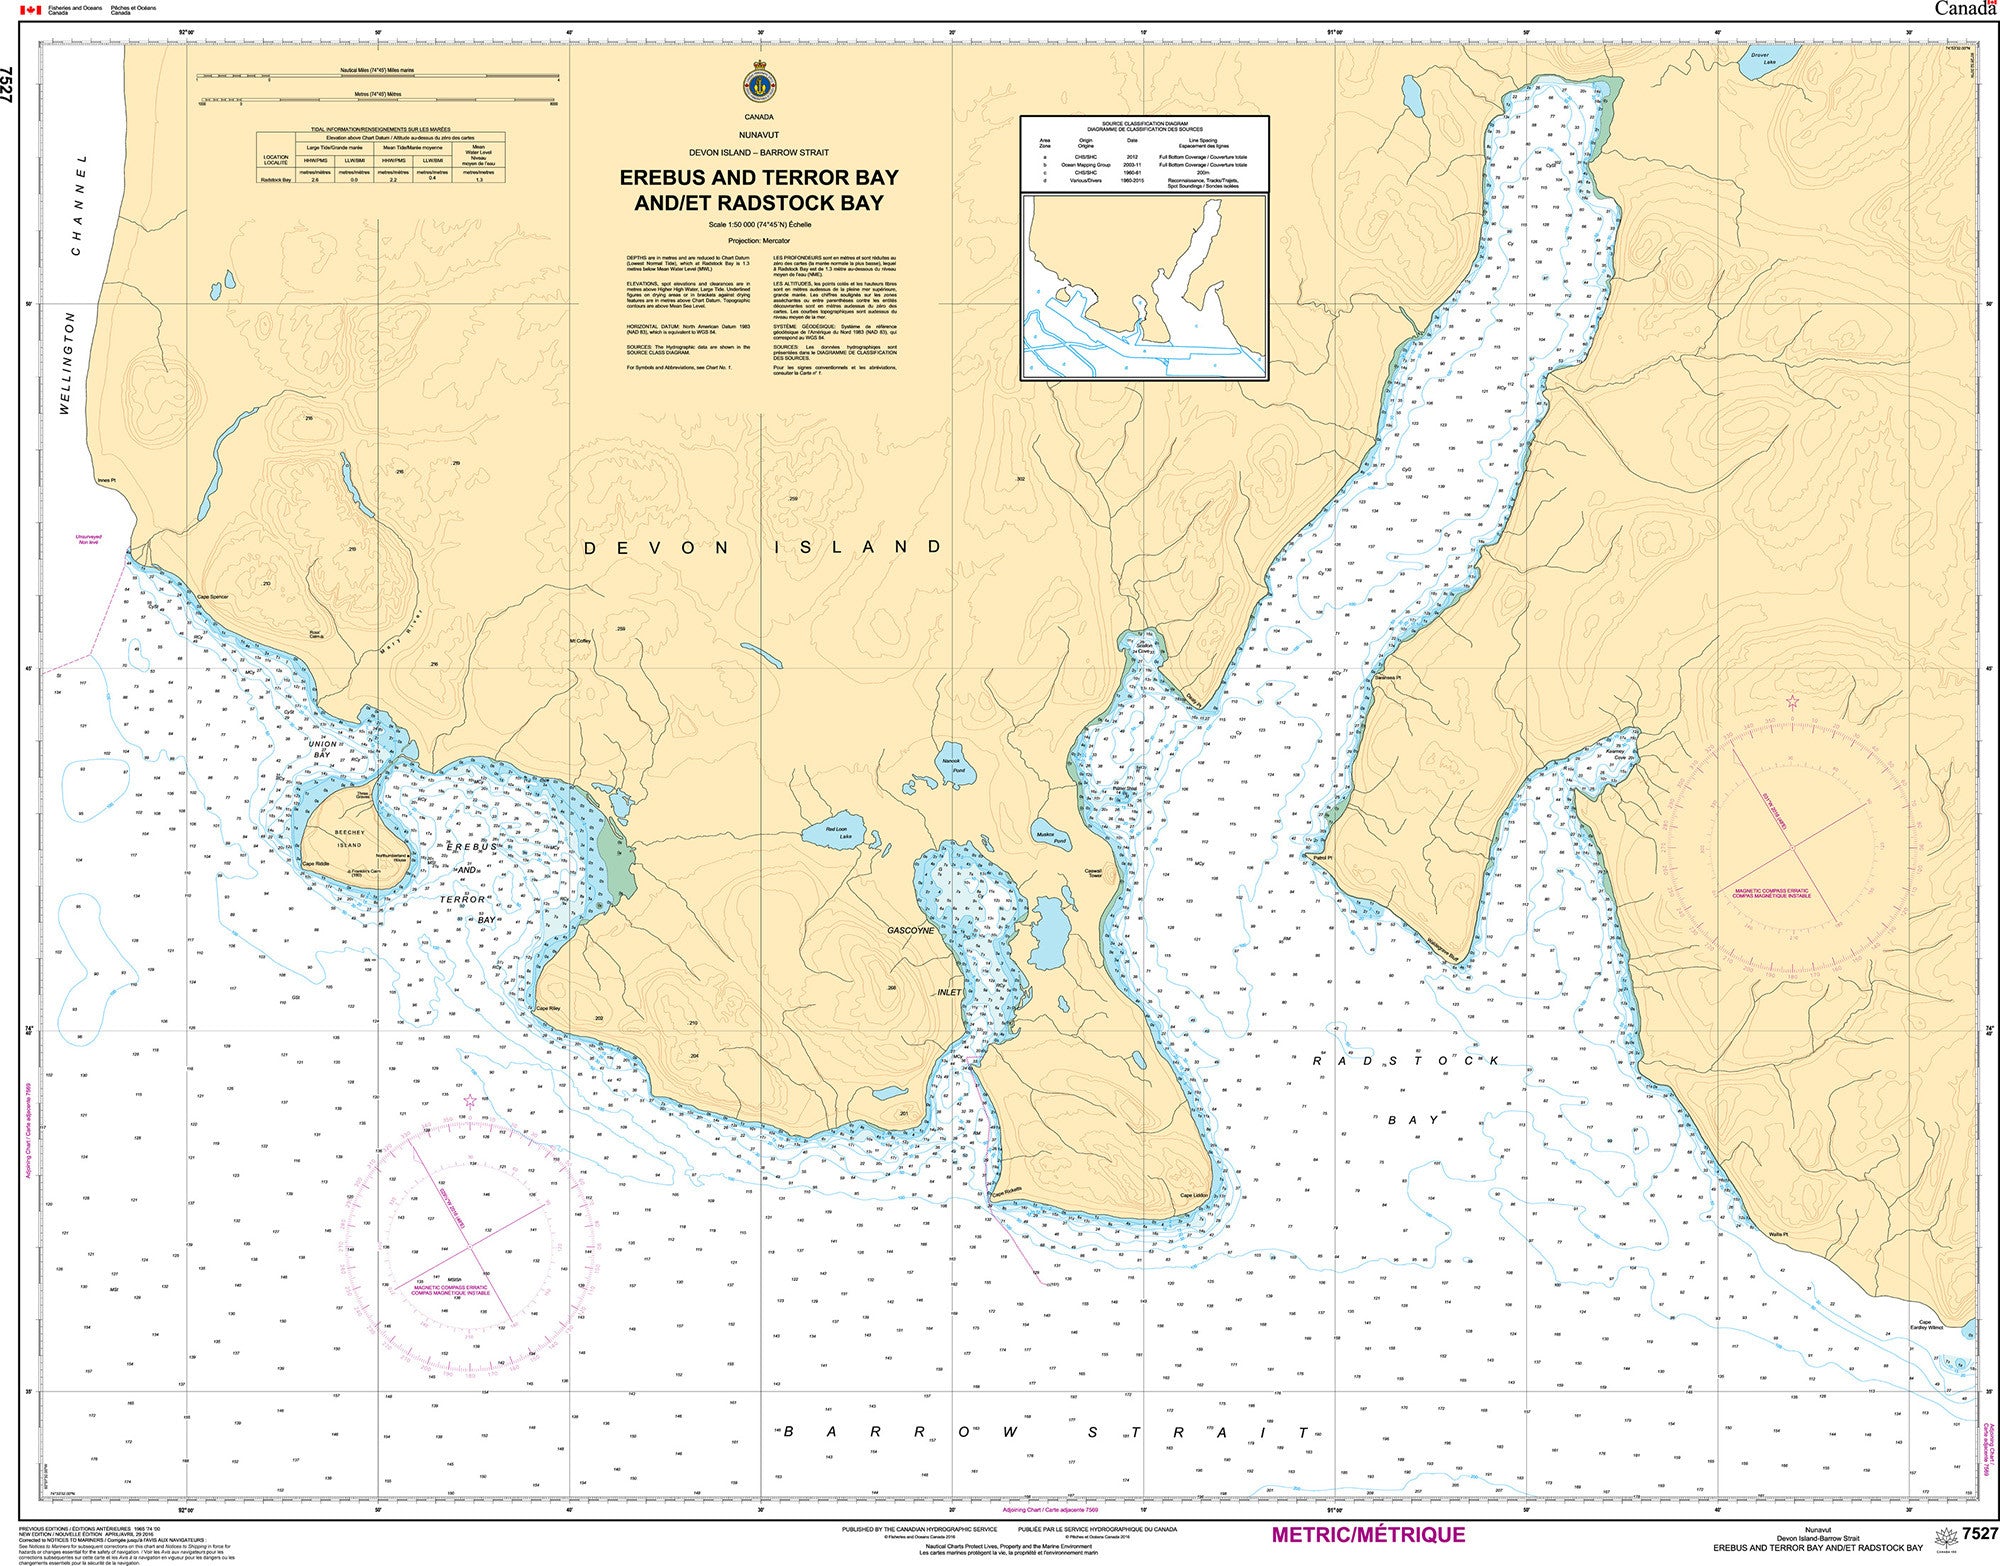 Canadian Hydrographic Service Nautical Chart CHS7527: Erebus Bay and/et Radstock Bay